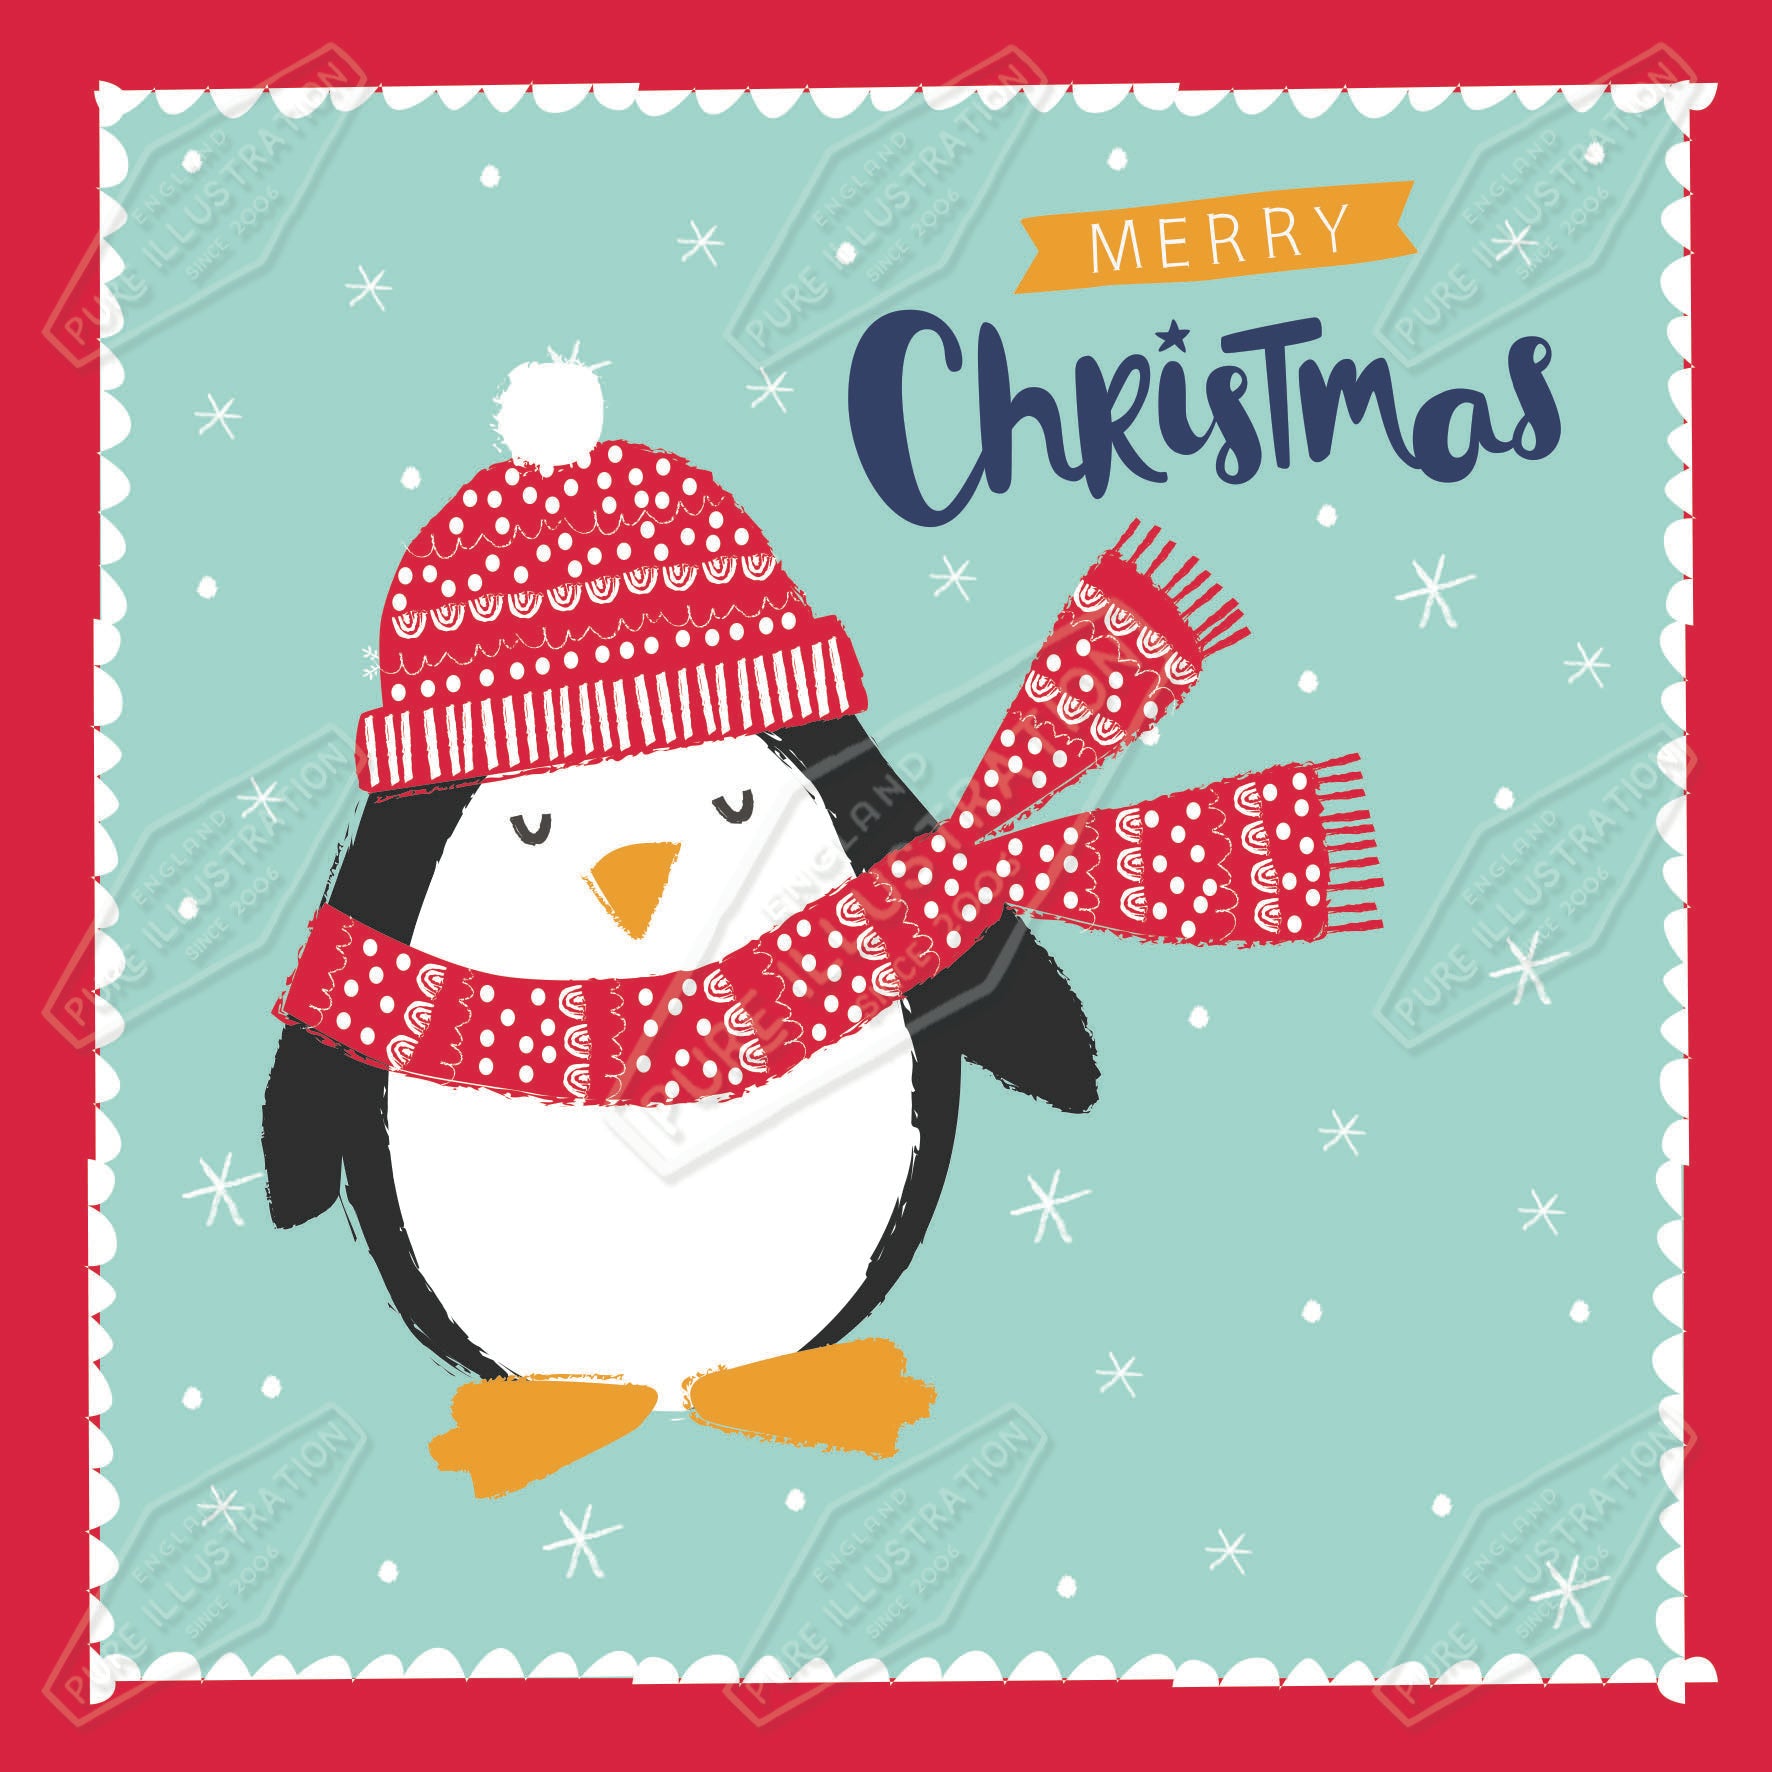 00035419IMC- Isla McDonald is represented by Pure Art Licensing Agency - Christmas Greeting Card Design